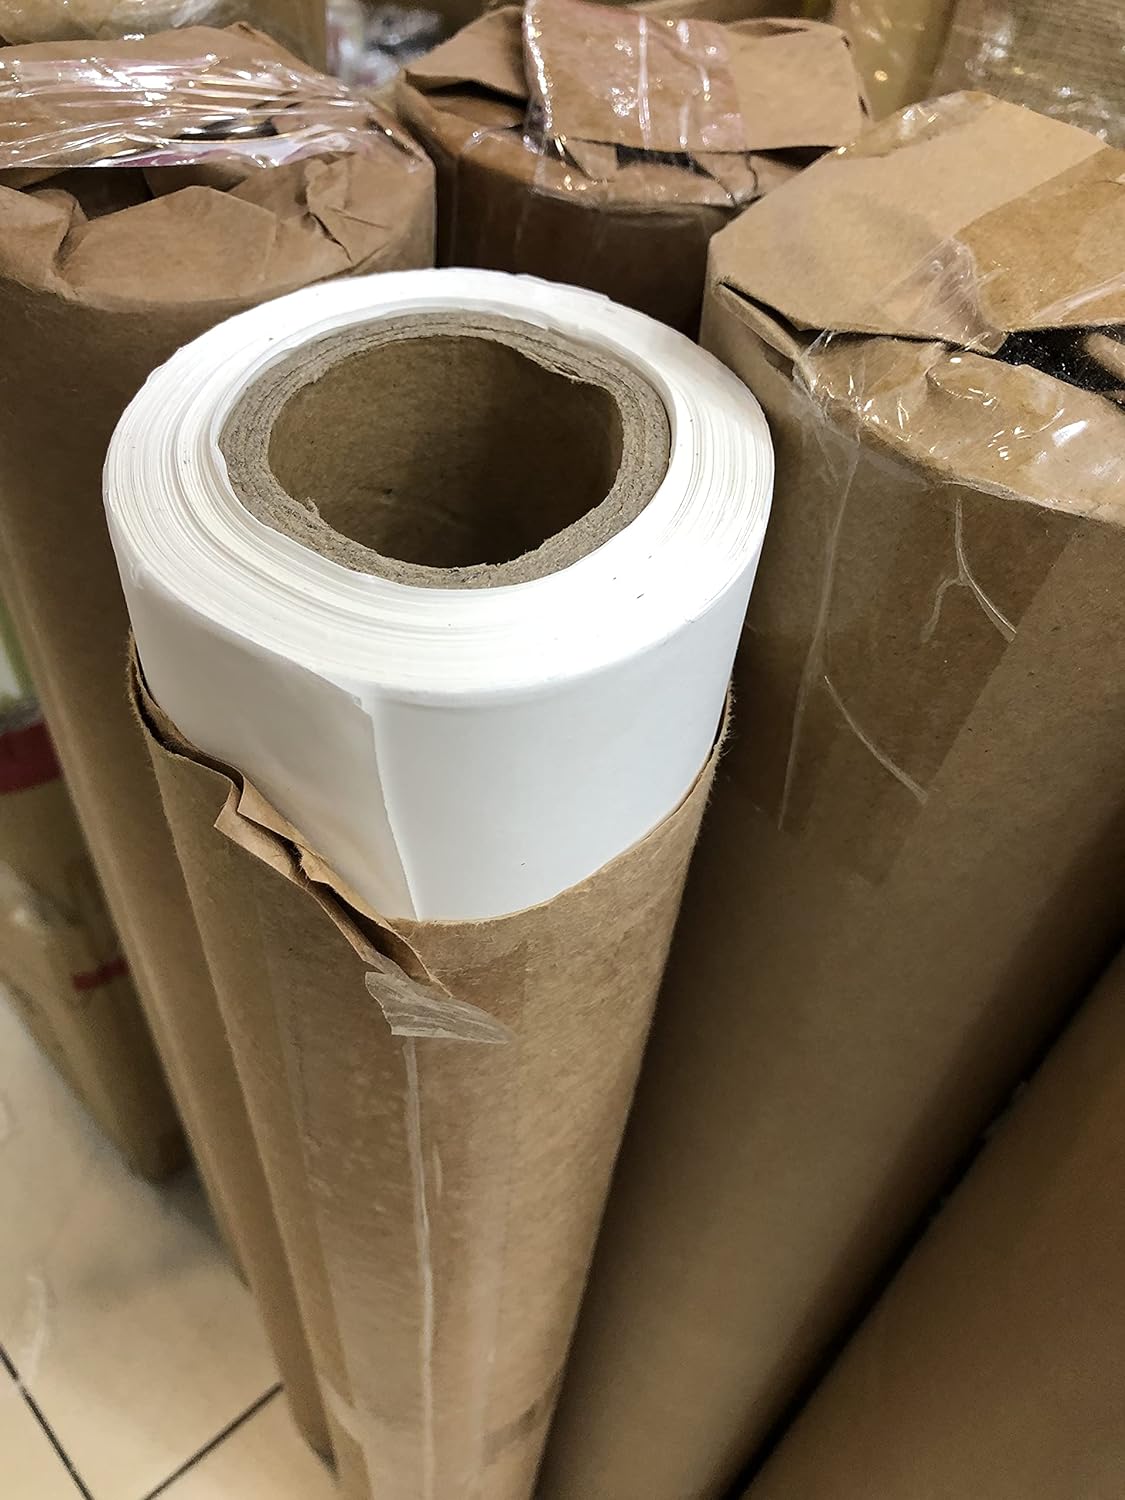 White Kraft Wrapping Paper Roll - Al Ghani Stores